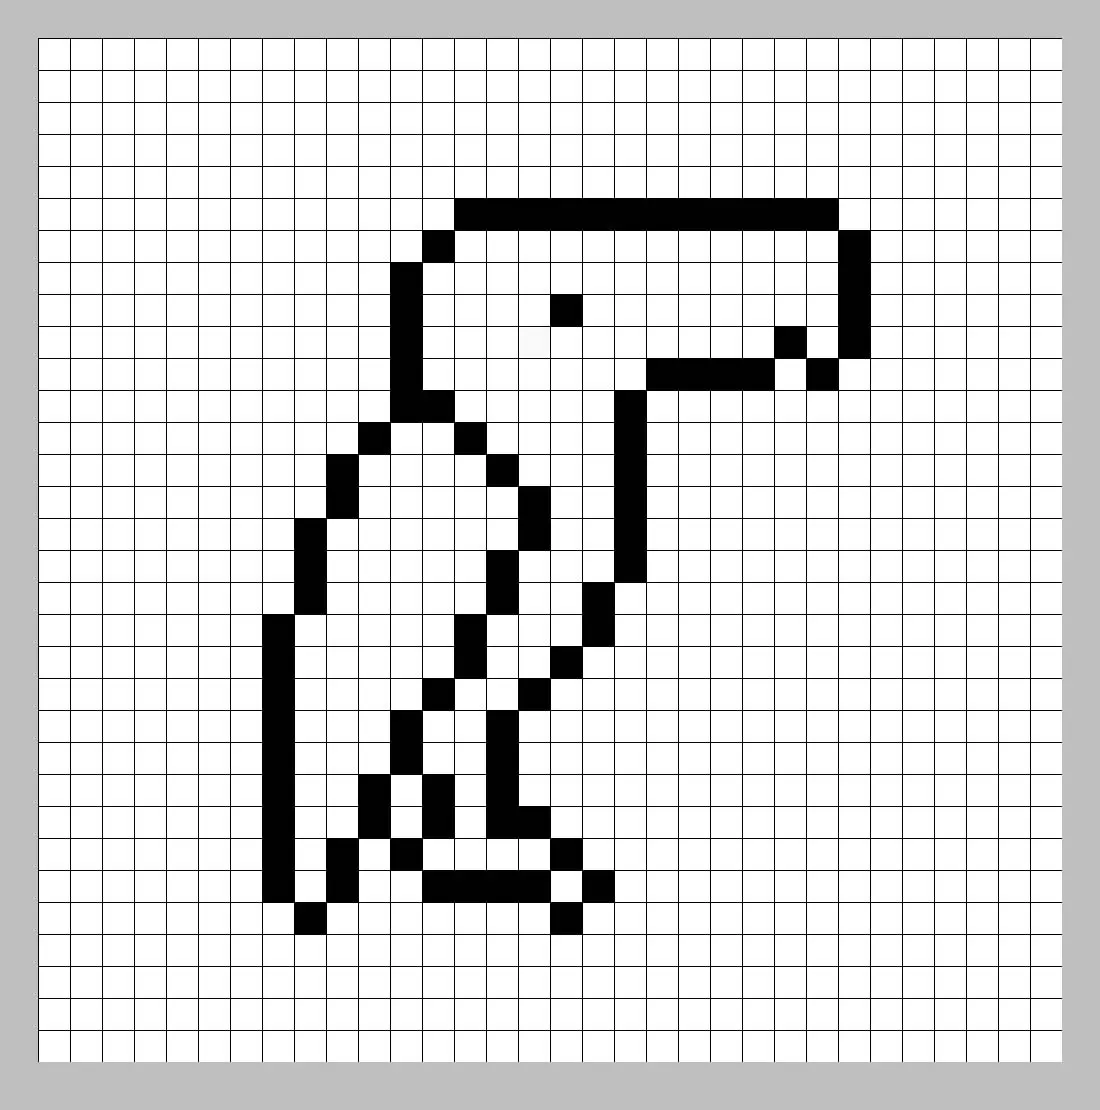 An outline of the pixel art toucan grid similar to a spreadsheet